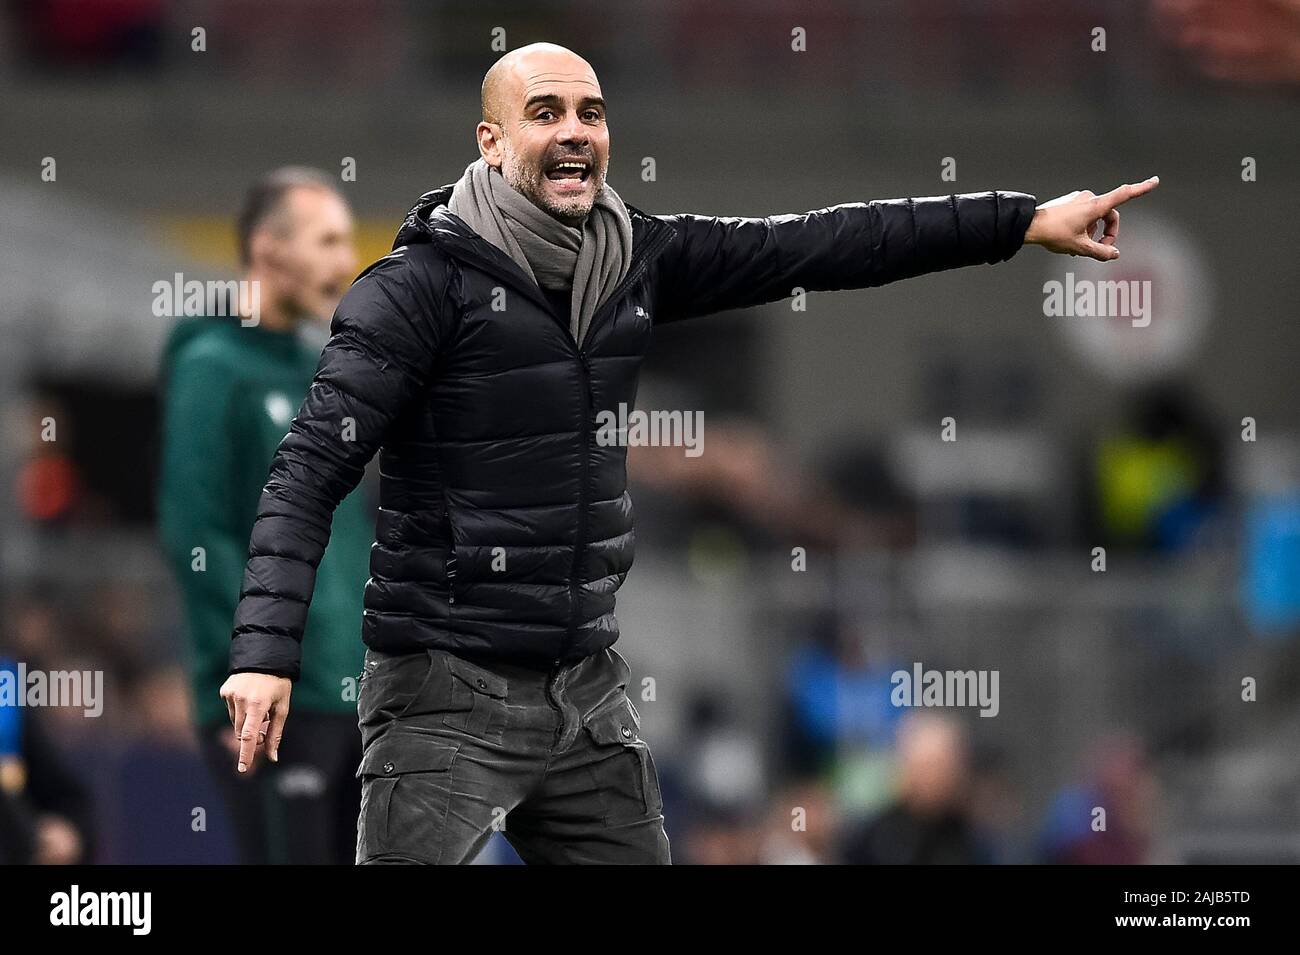 Milan, Italy - 06 November, 2019: Josep Guardiola, head coach of Manchester City FC, gestures during the UEFA Champions League football match between Atalanta BC and Manchester City FC. The match ended in a 1-1 tie. Credit: Nicolò Campo/Alamy Live News Stock Photo